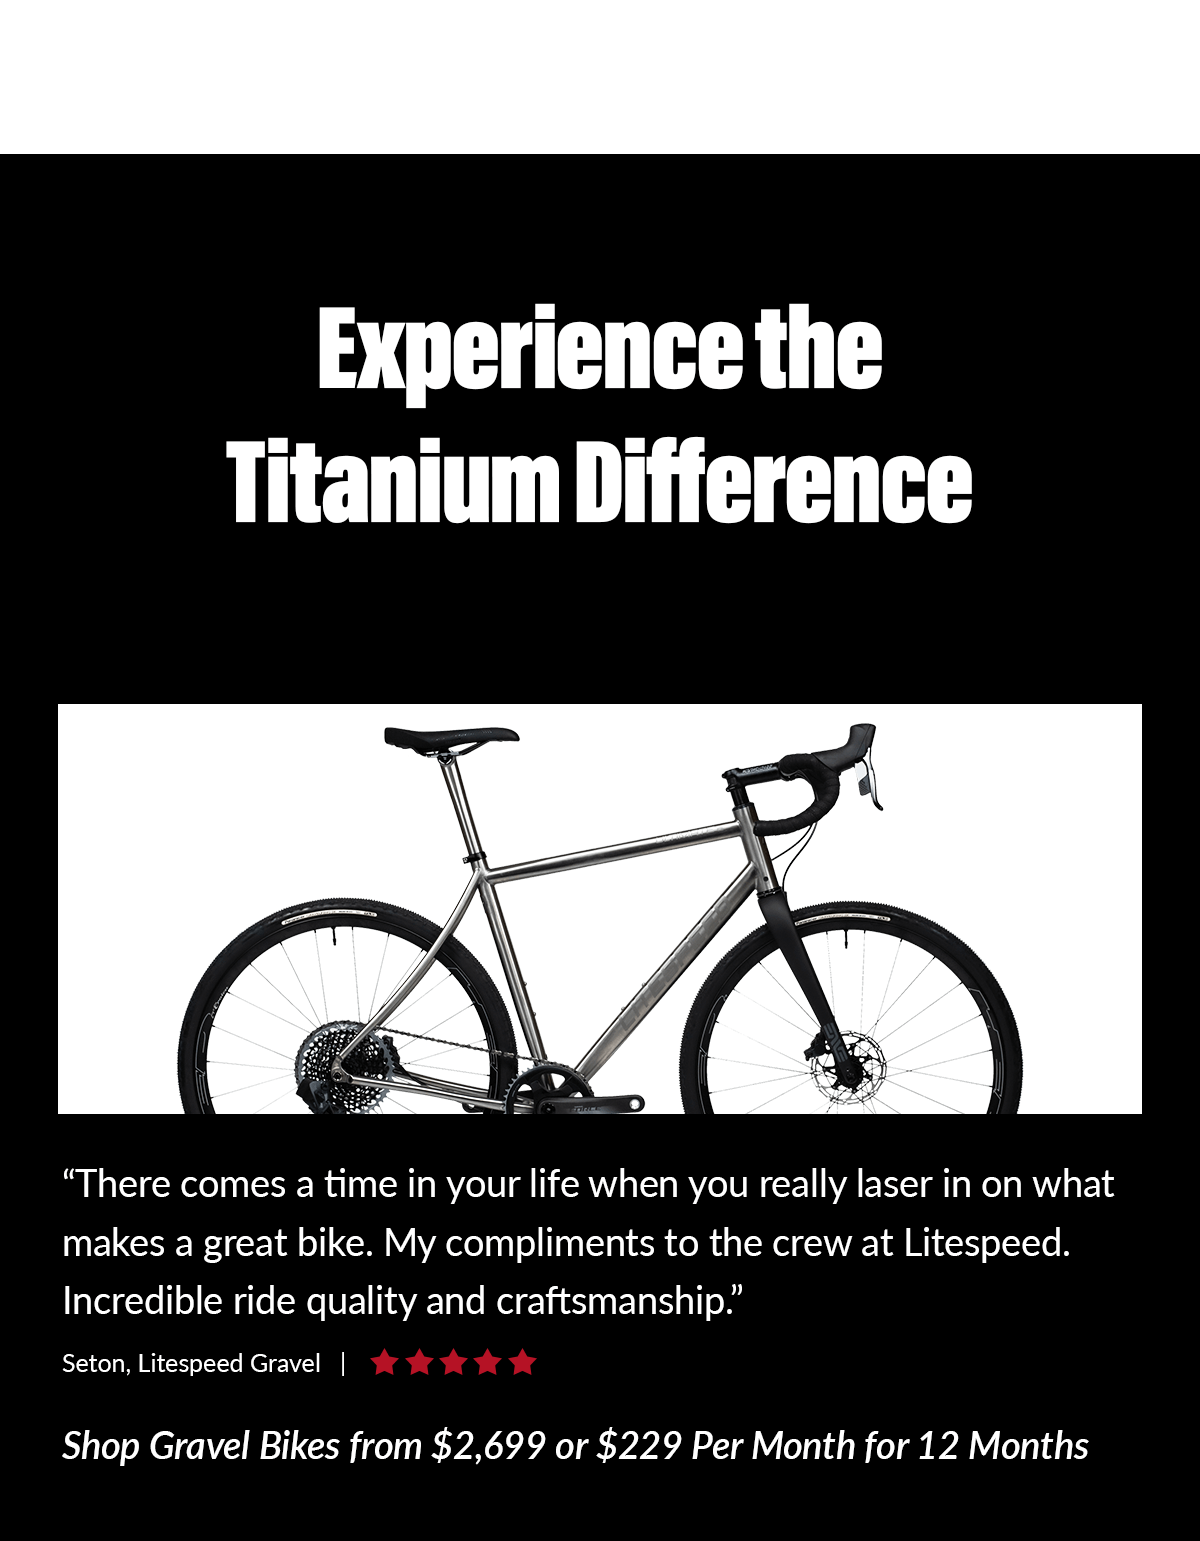 Experience the titanium difference! Shop titanium gravel bikes from $2,699